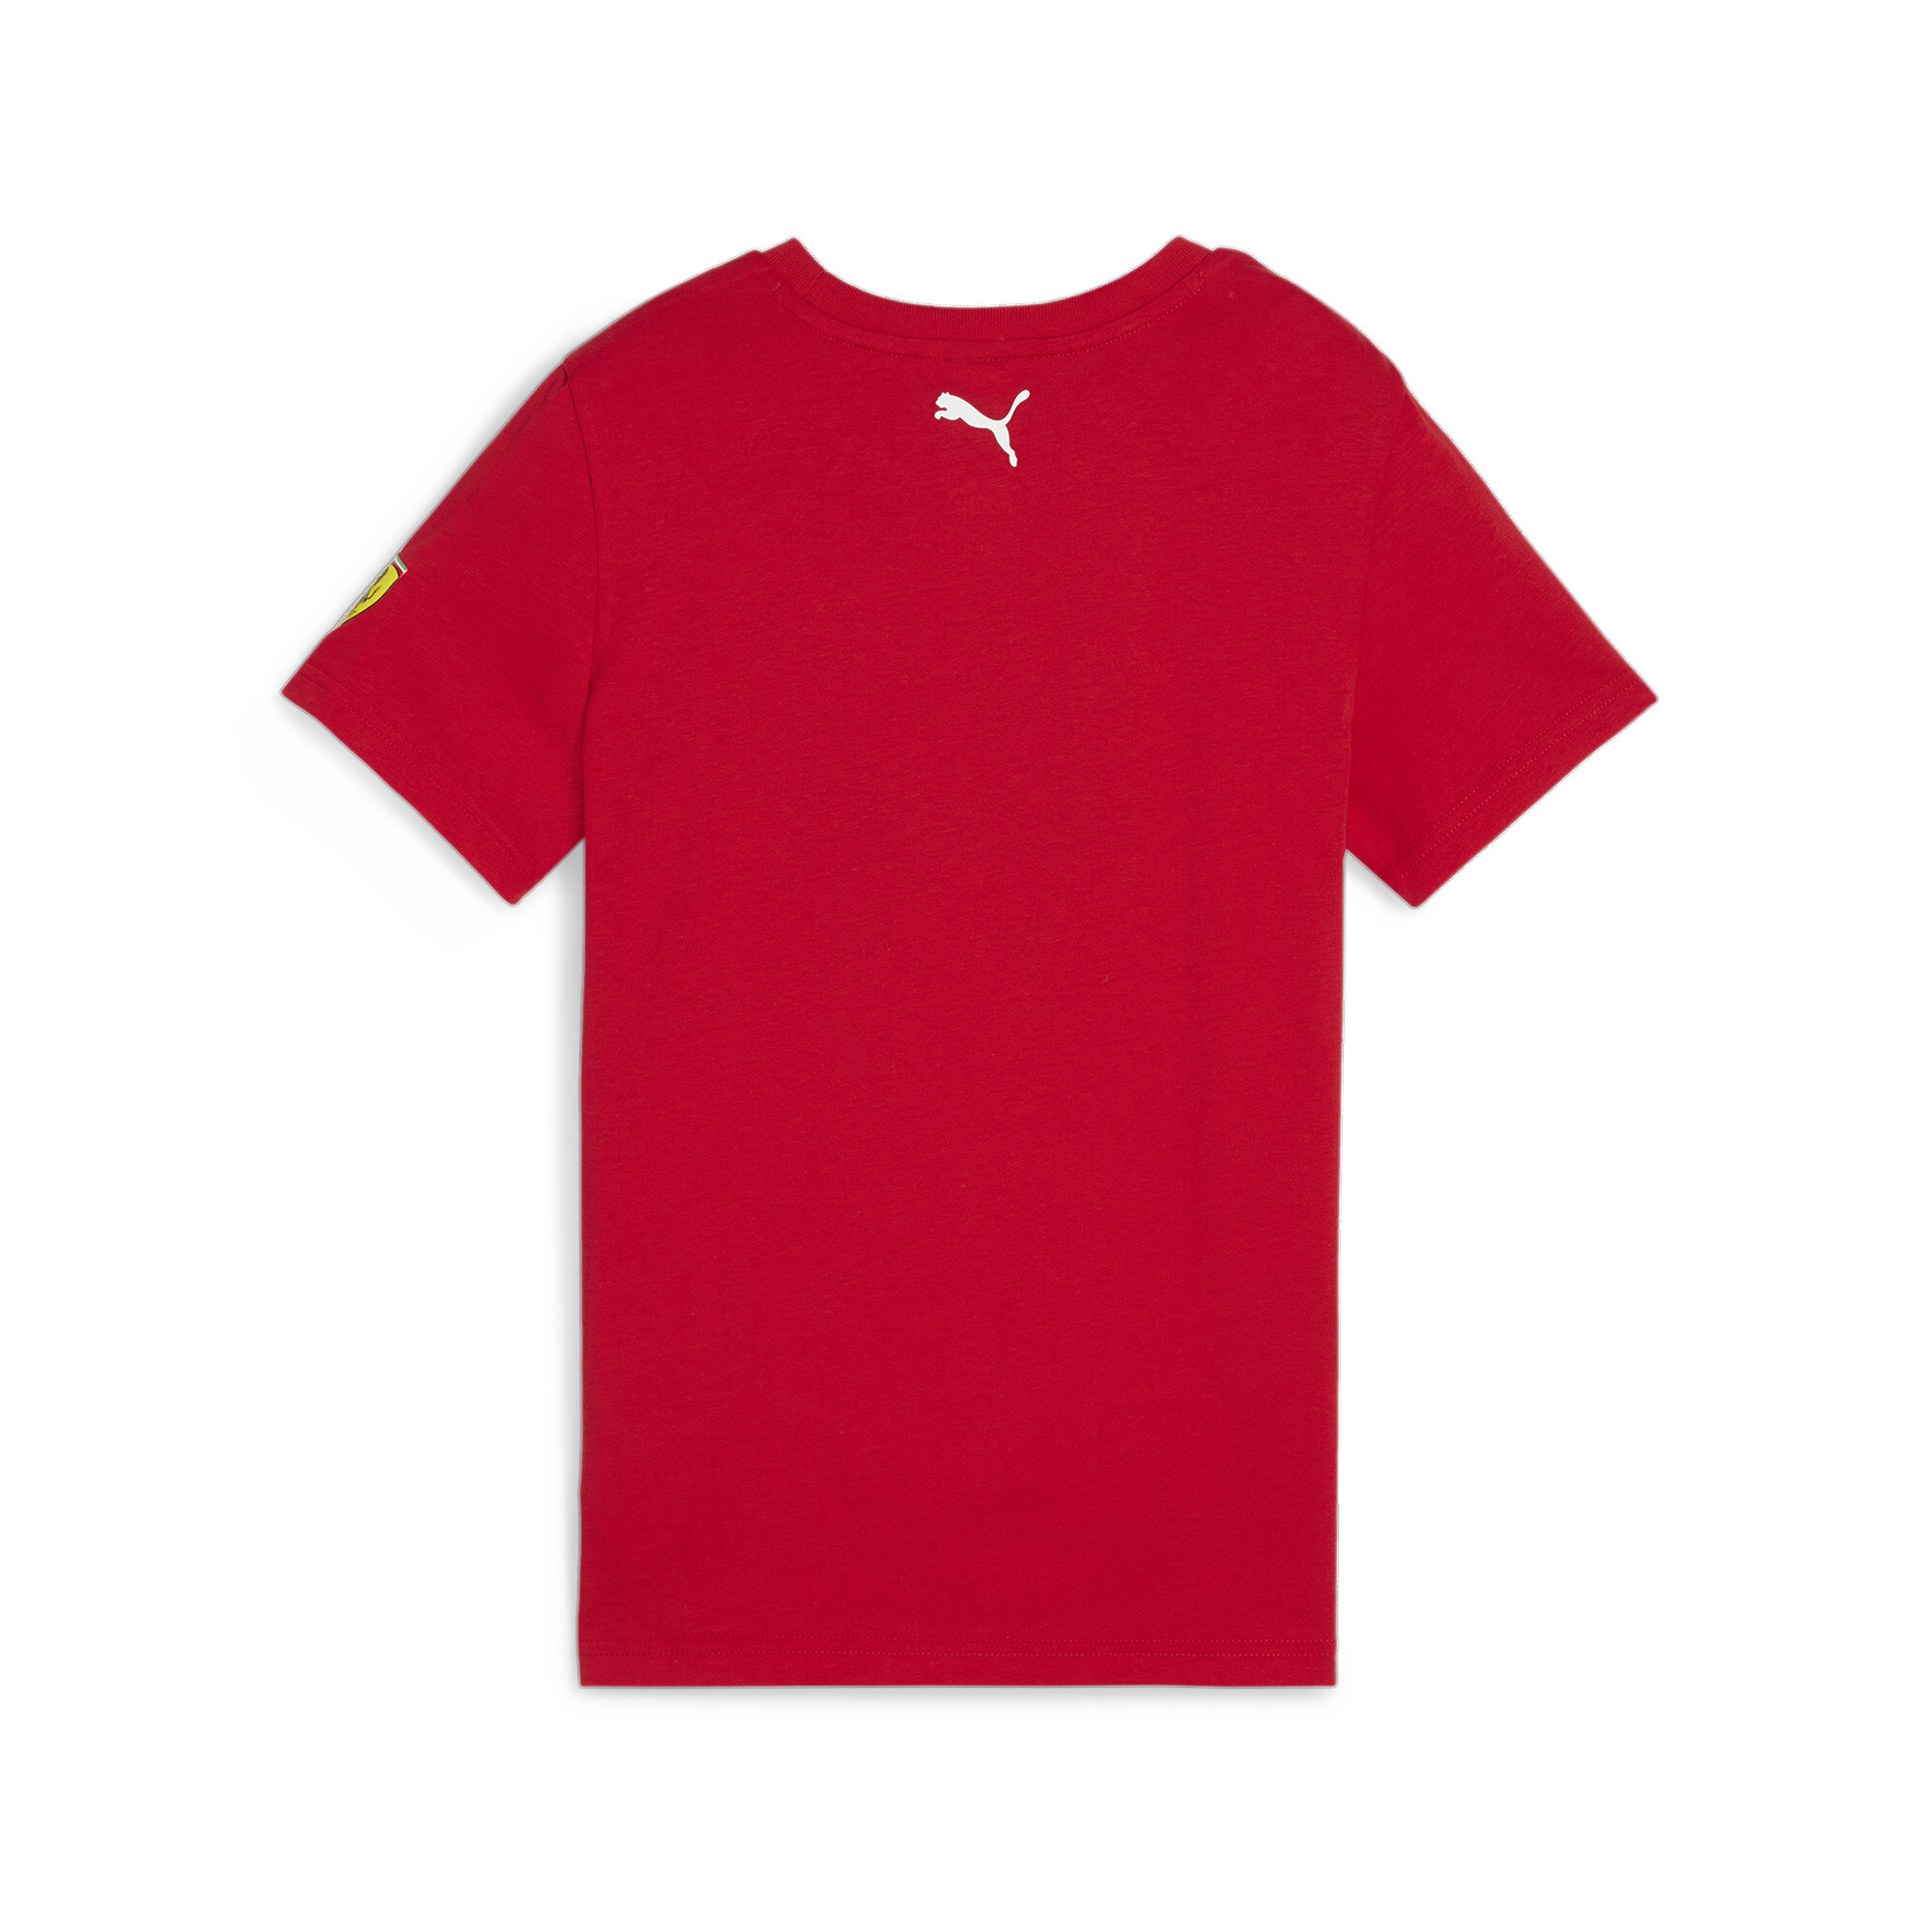 Puma Scuderia Ferrari Race Youth Motorsport Graphic T-Shirt, Red, Size 11-12Y, Clothing